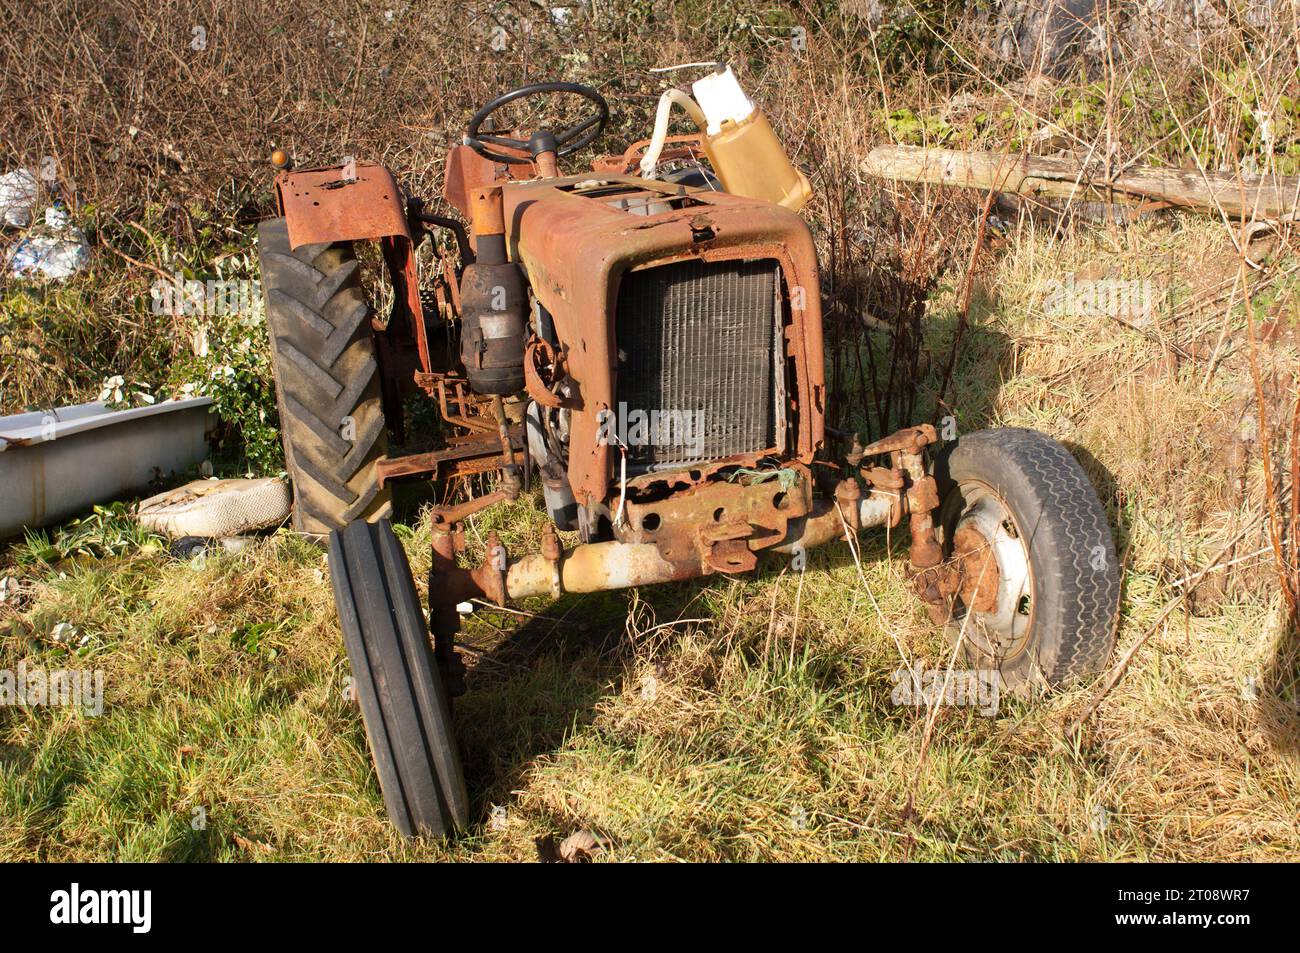 An old rusting tractor outdoors in a field - John Gollop Stock Photo